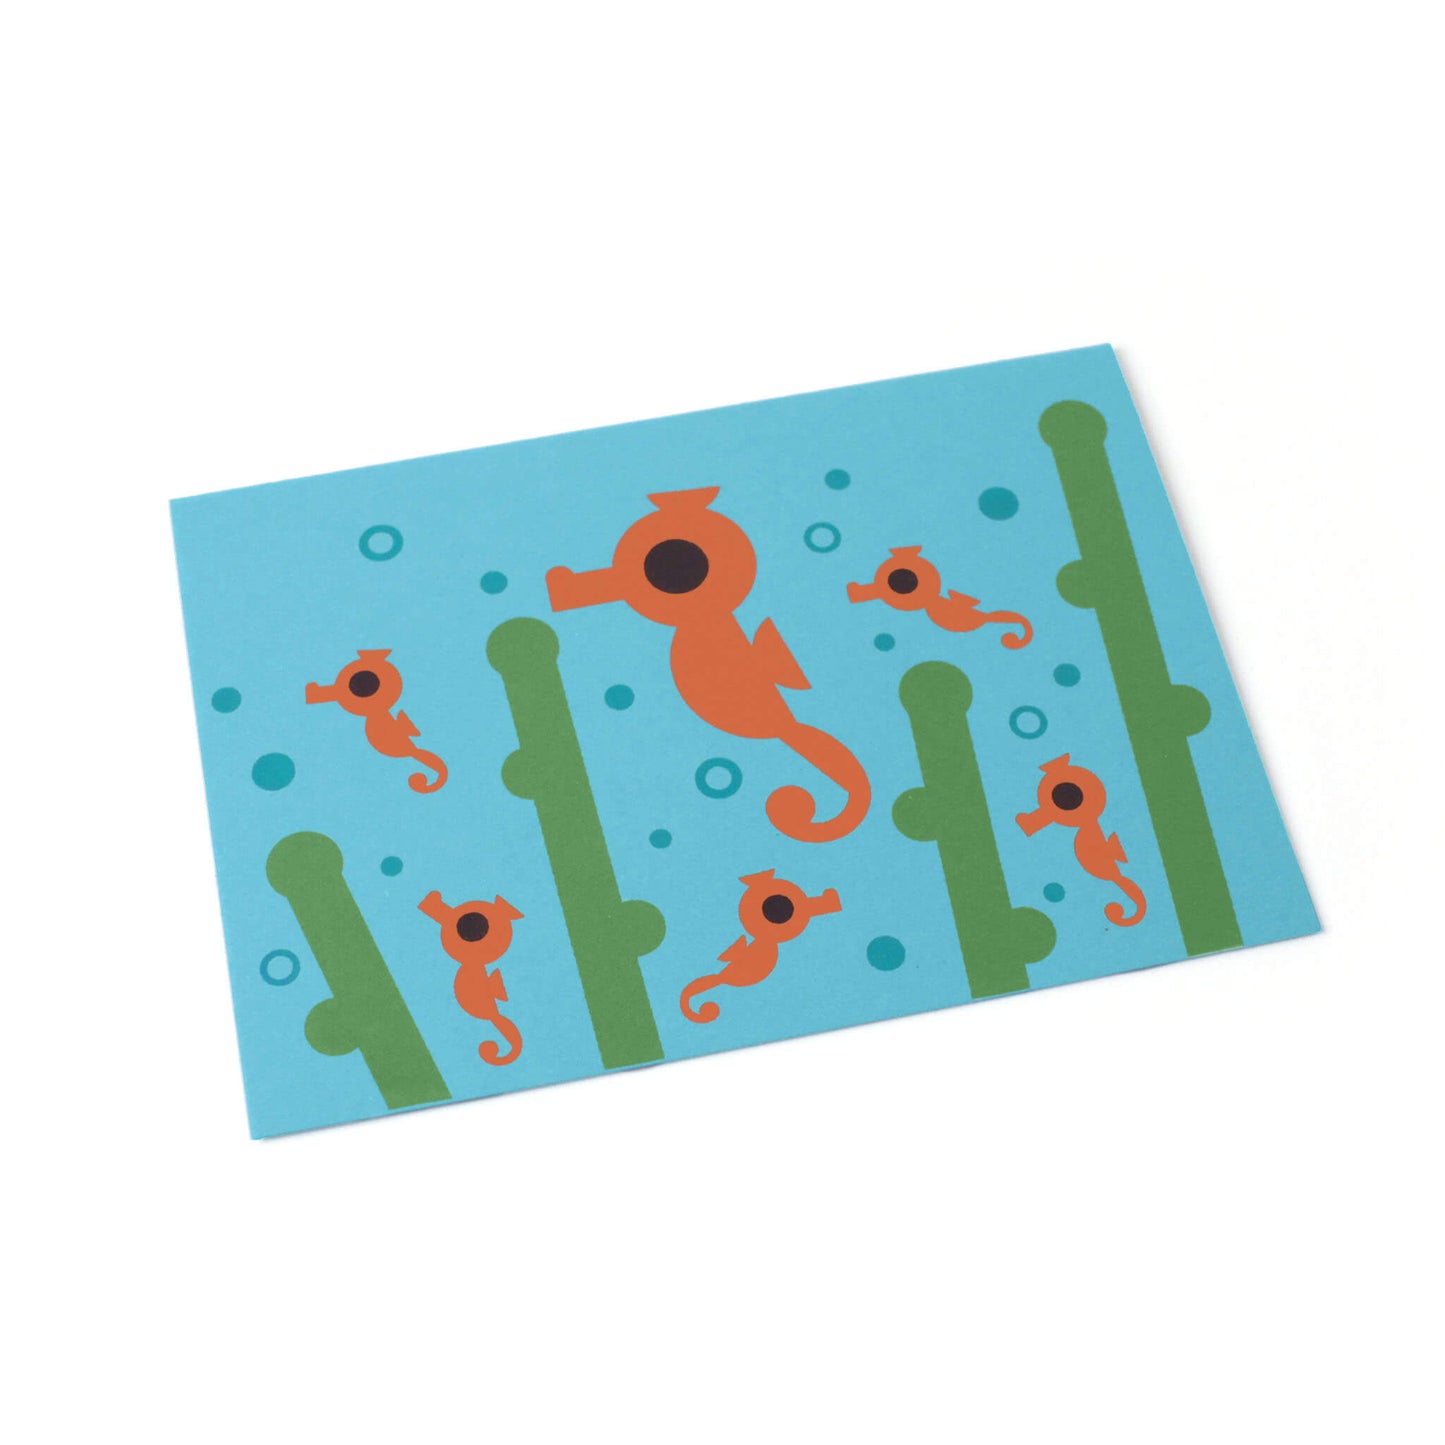 A tilted blue greeting card with seahorses, seagrass and bubbles illustrated.